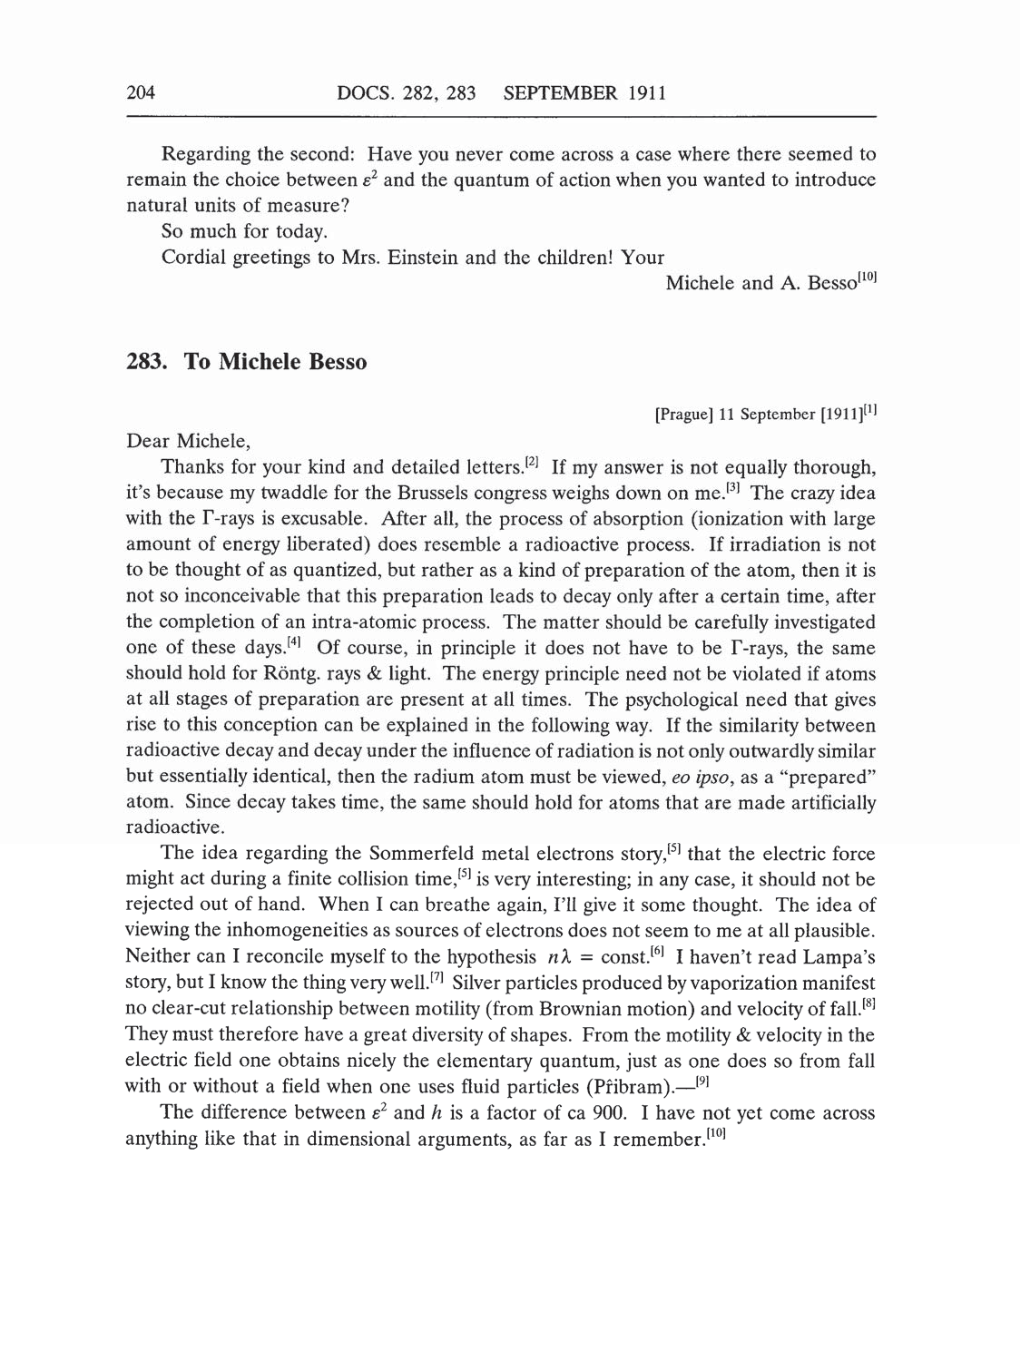 Volume 5: The Swiss Years: Correspondence, 1902-1914 (English translation supplement) page 204